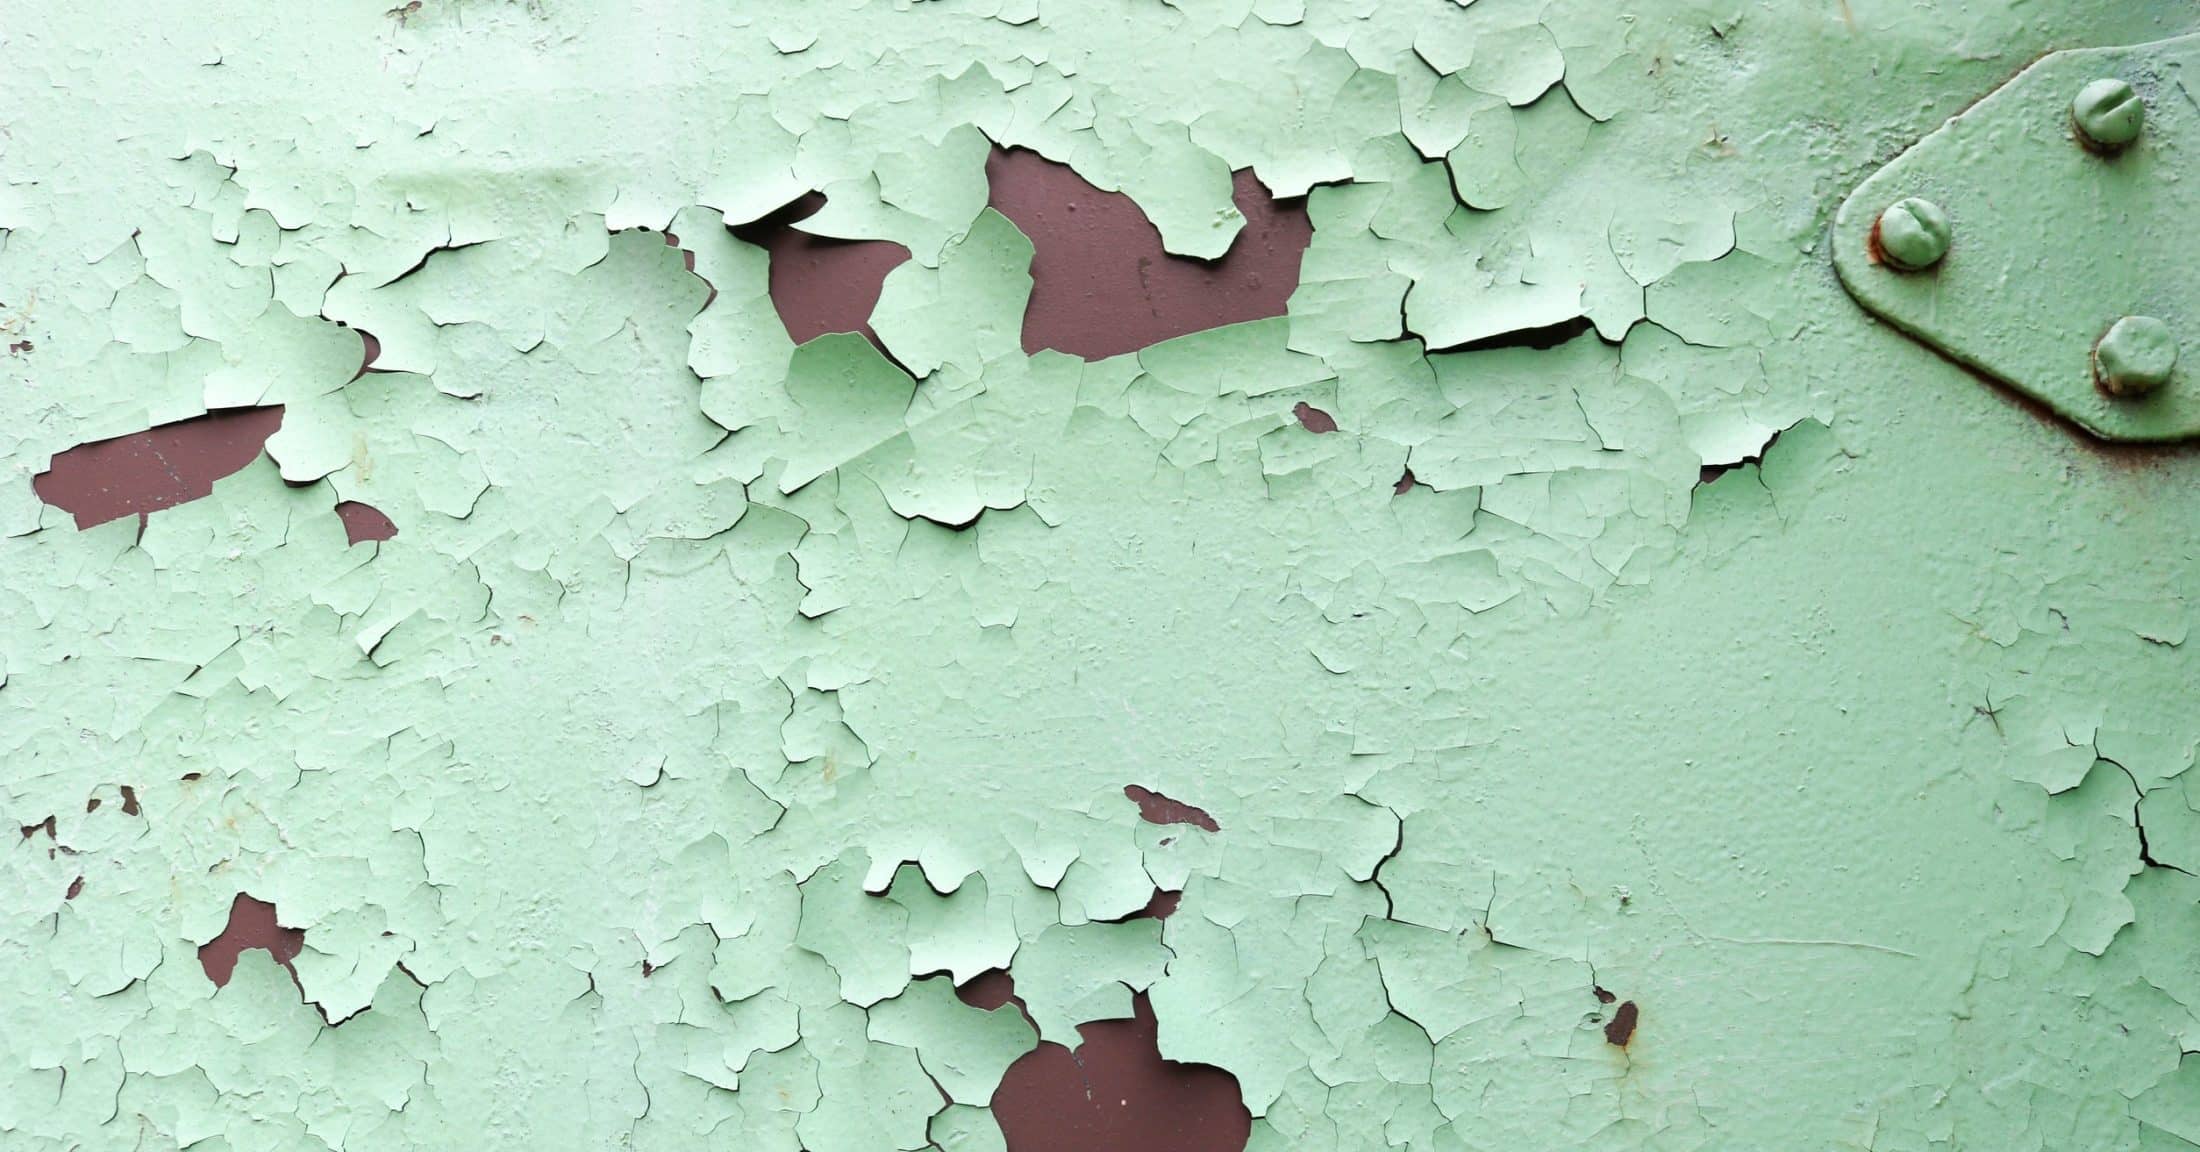 Old paint peeling off a metal surface